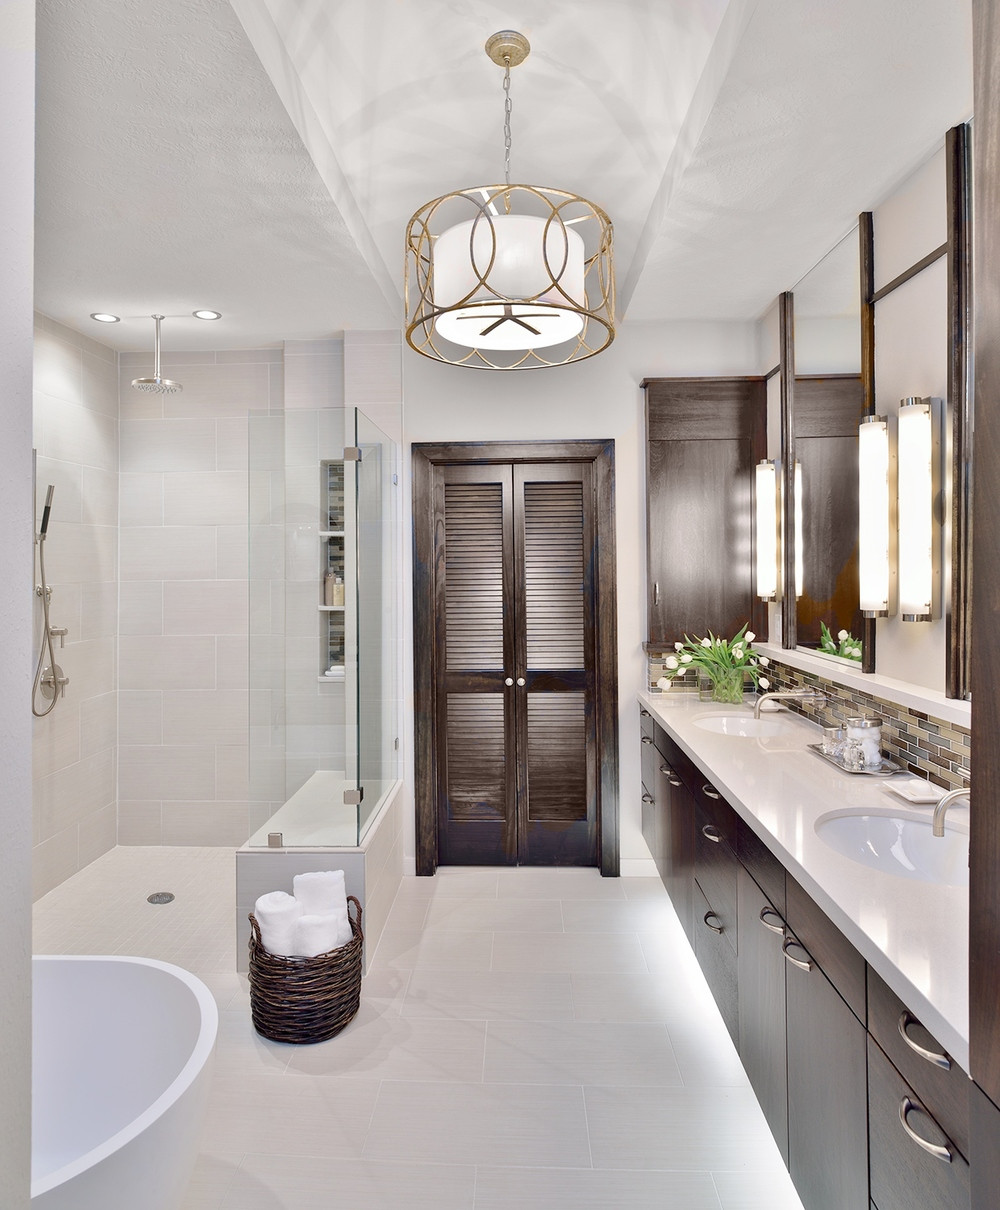 Bathroom Remodel Planner
 Planning A Bathroom Remodel Consider The Layout First